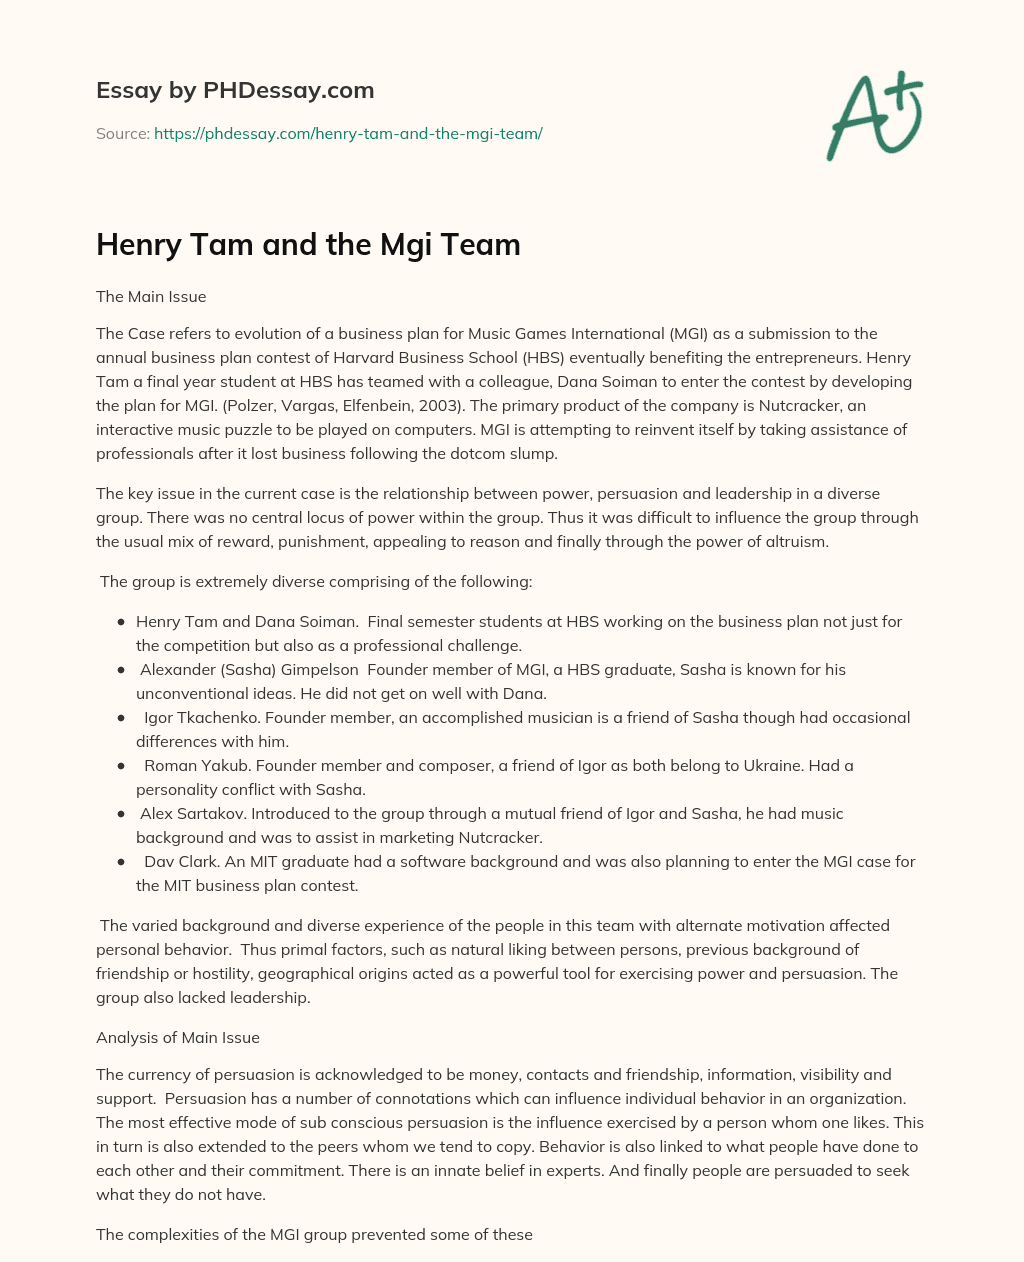 Henry Tam and the Mgi Team essay